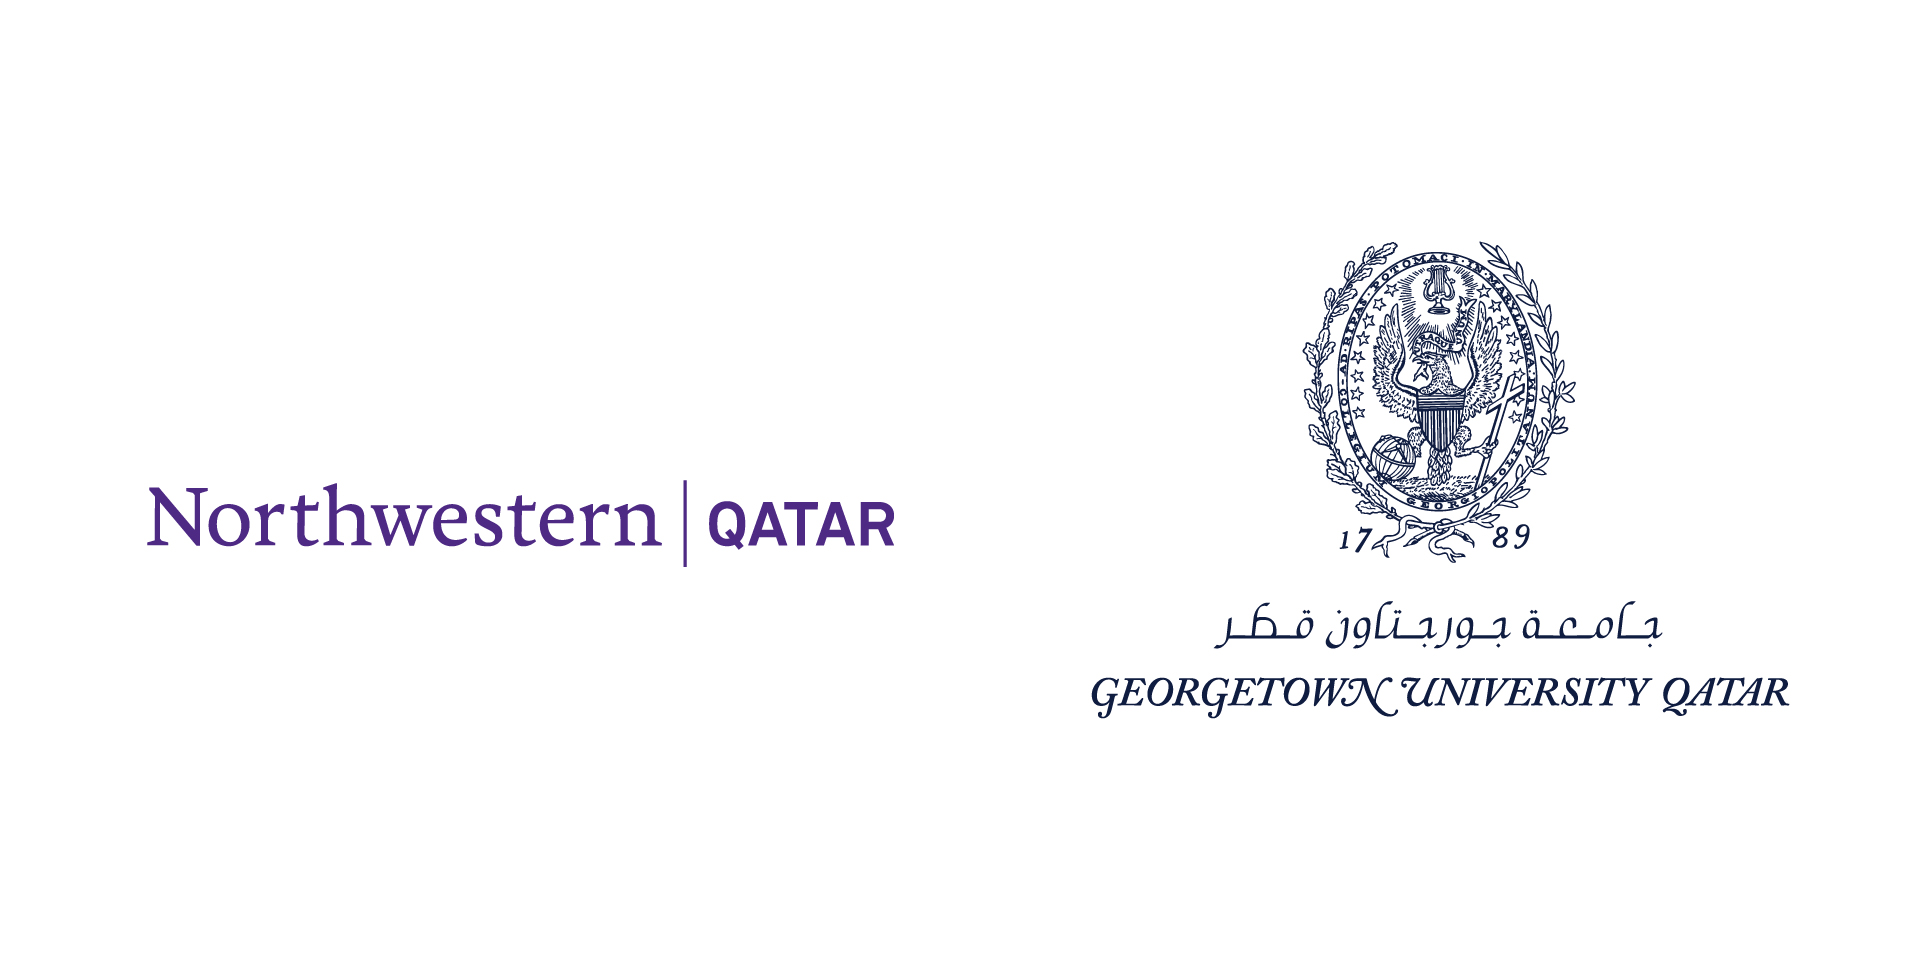 Northwestern Qatar’s Executive Education Program includes a masterclass on effective negotiation skills offered in collaboration with Georgetown University in Qatar.